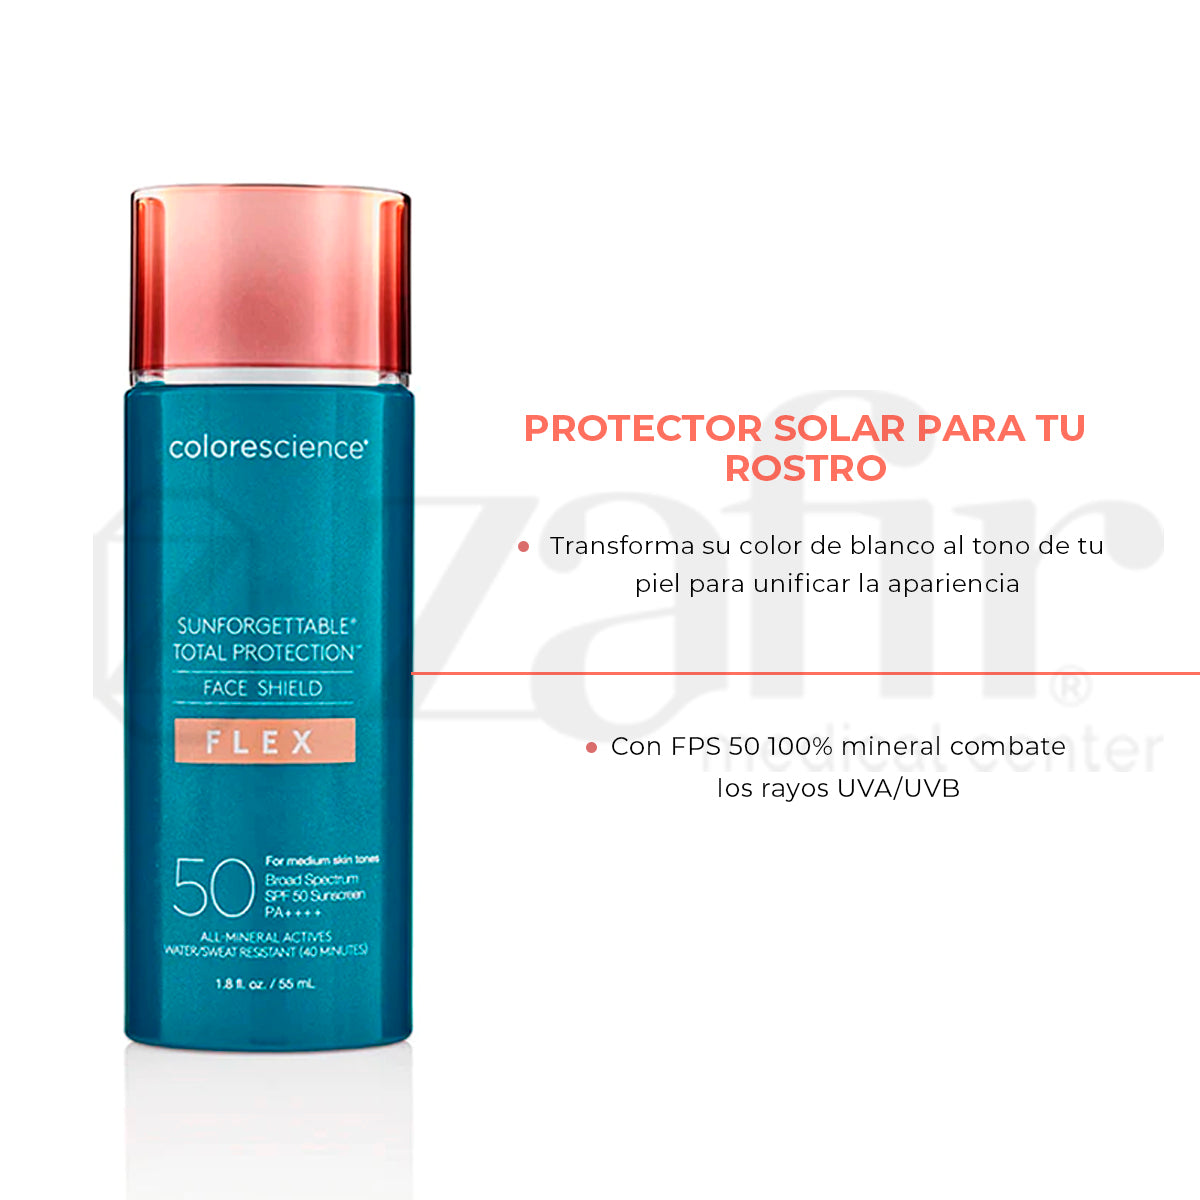 Protector Solar Mineral Colorescience Sunforgettable Total Protection Face Shield Flex Medium 55mL